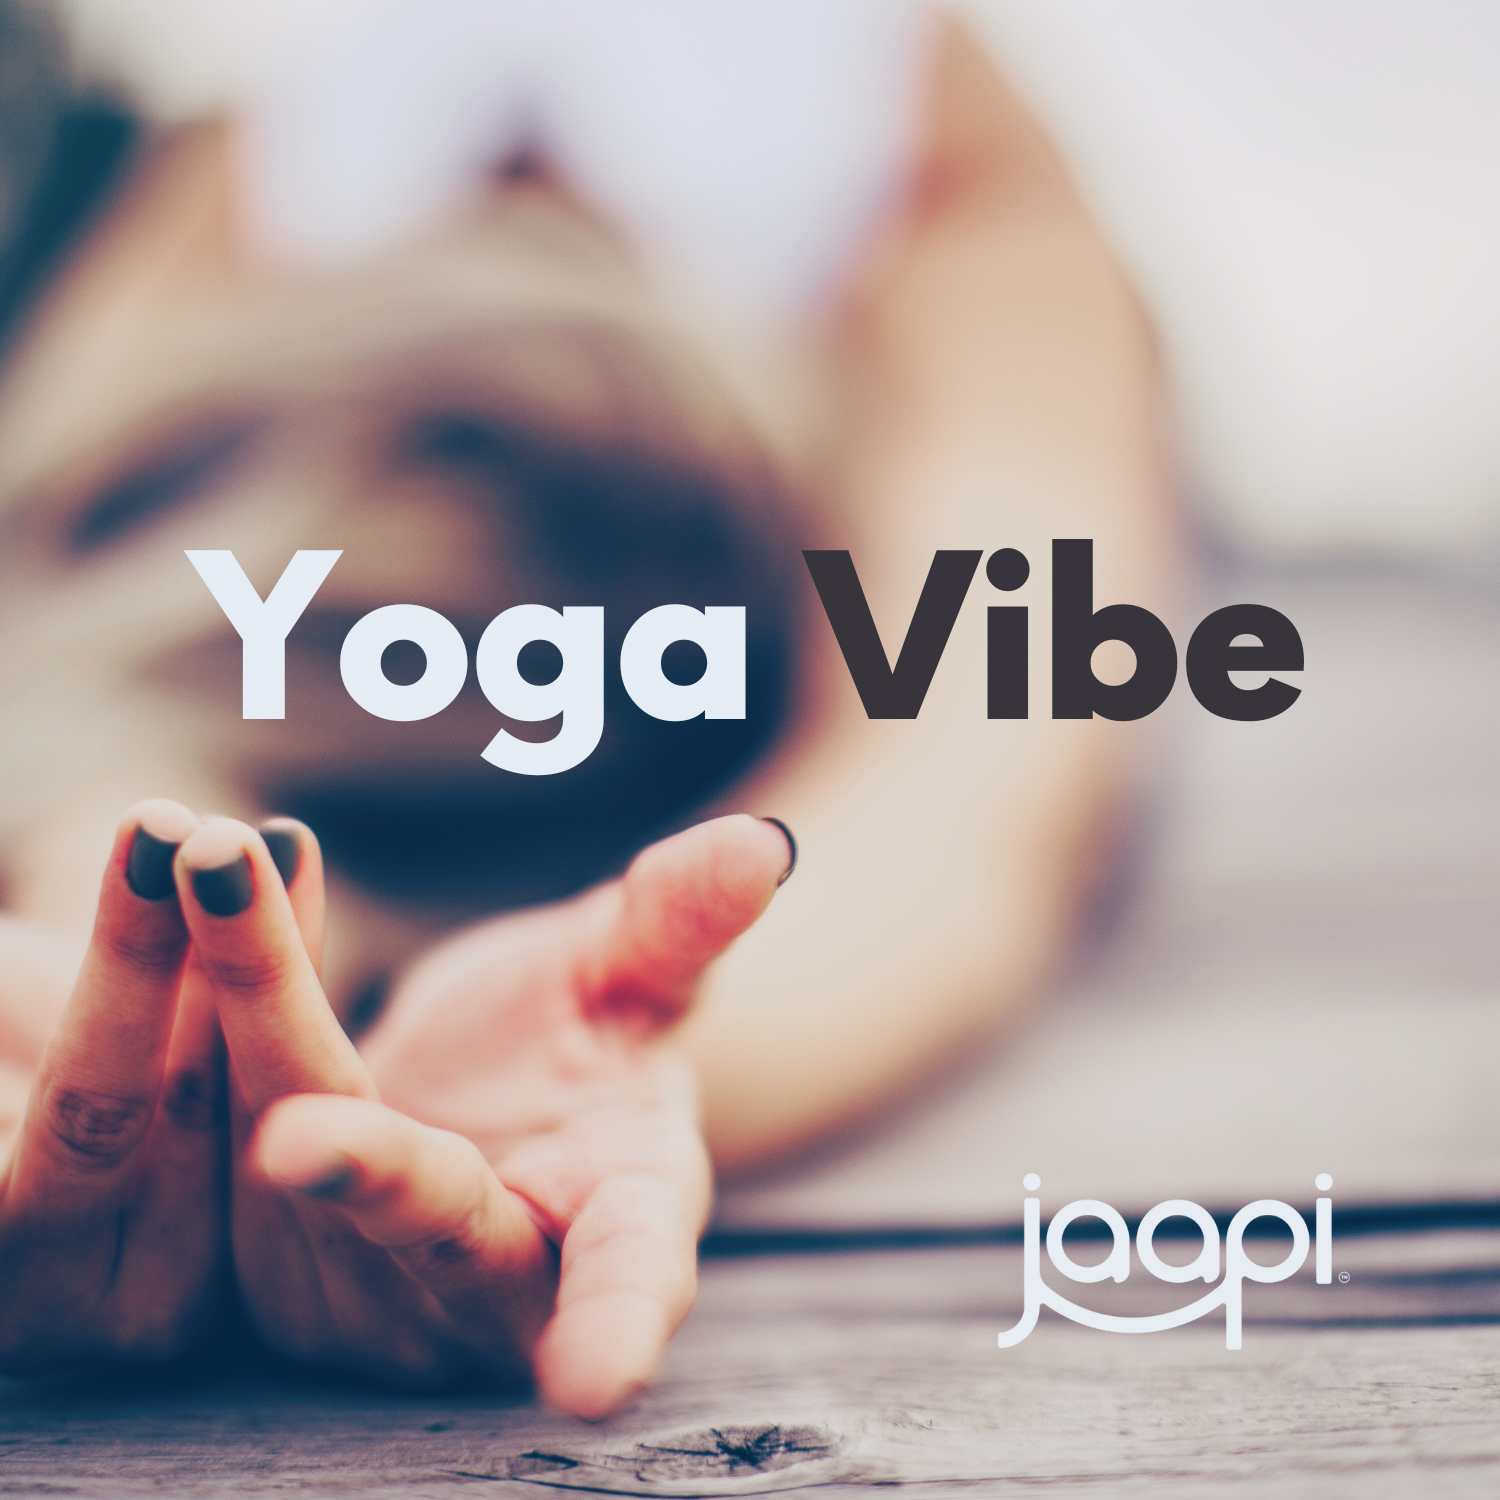 Yoga Vibe: High vibes beats to deepen your yoga practice. Curated by Jaapi Media.